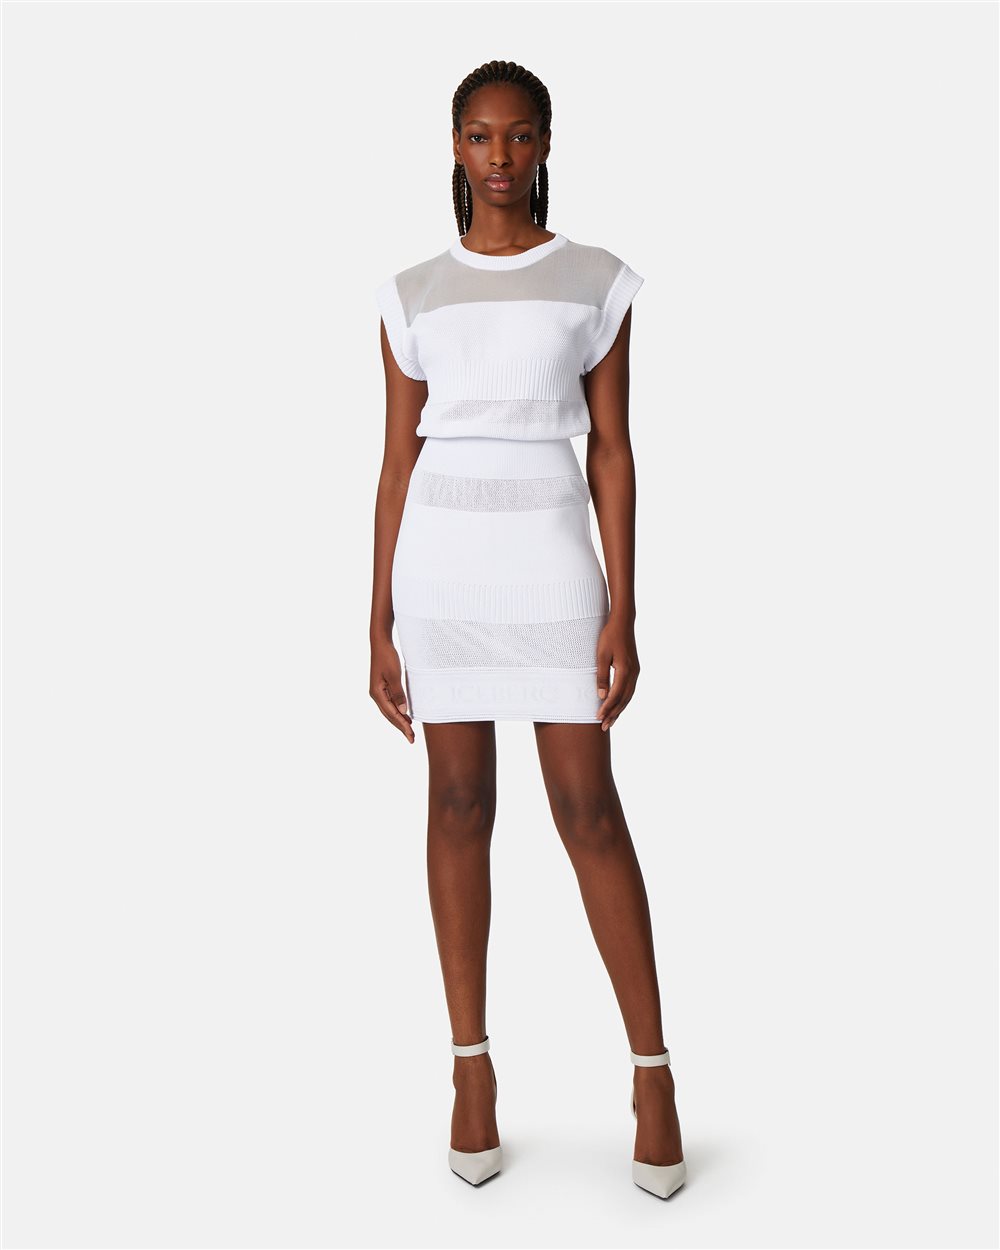 Knitted dress with logo - Iceberg - Official Website